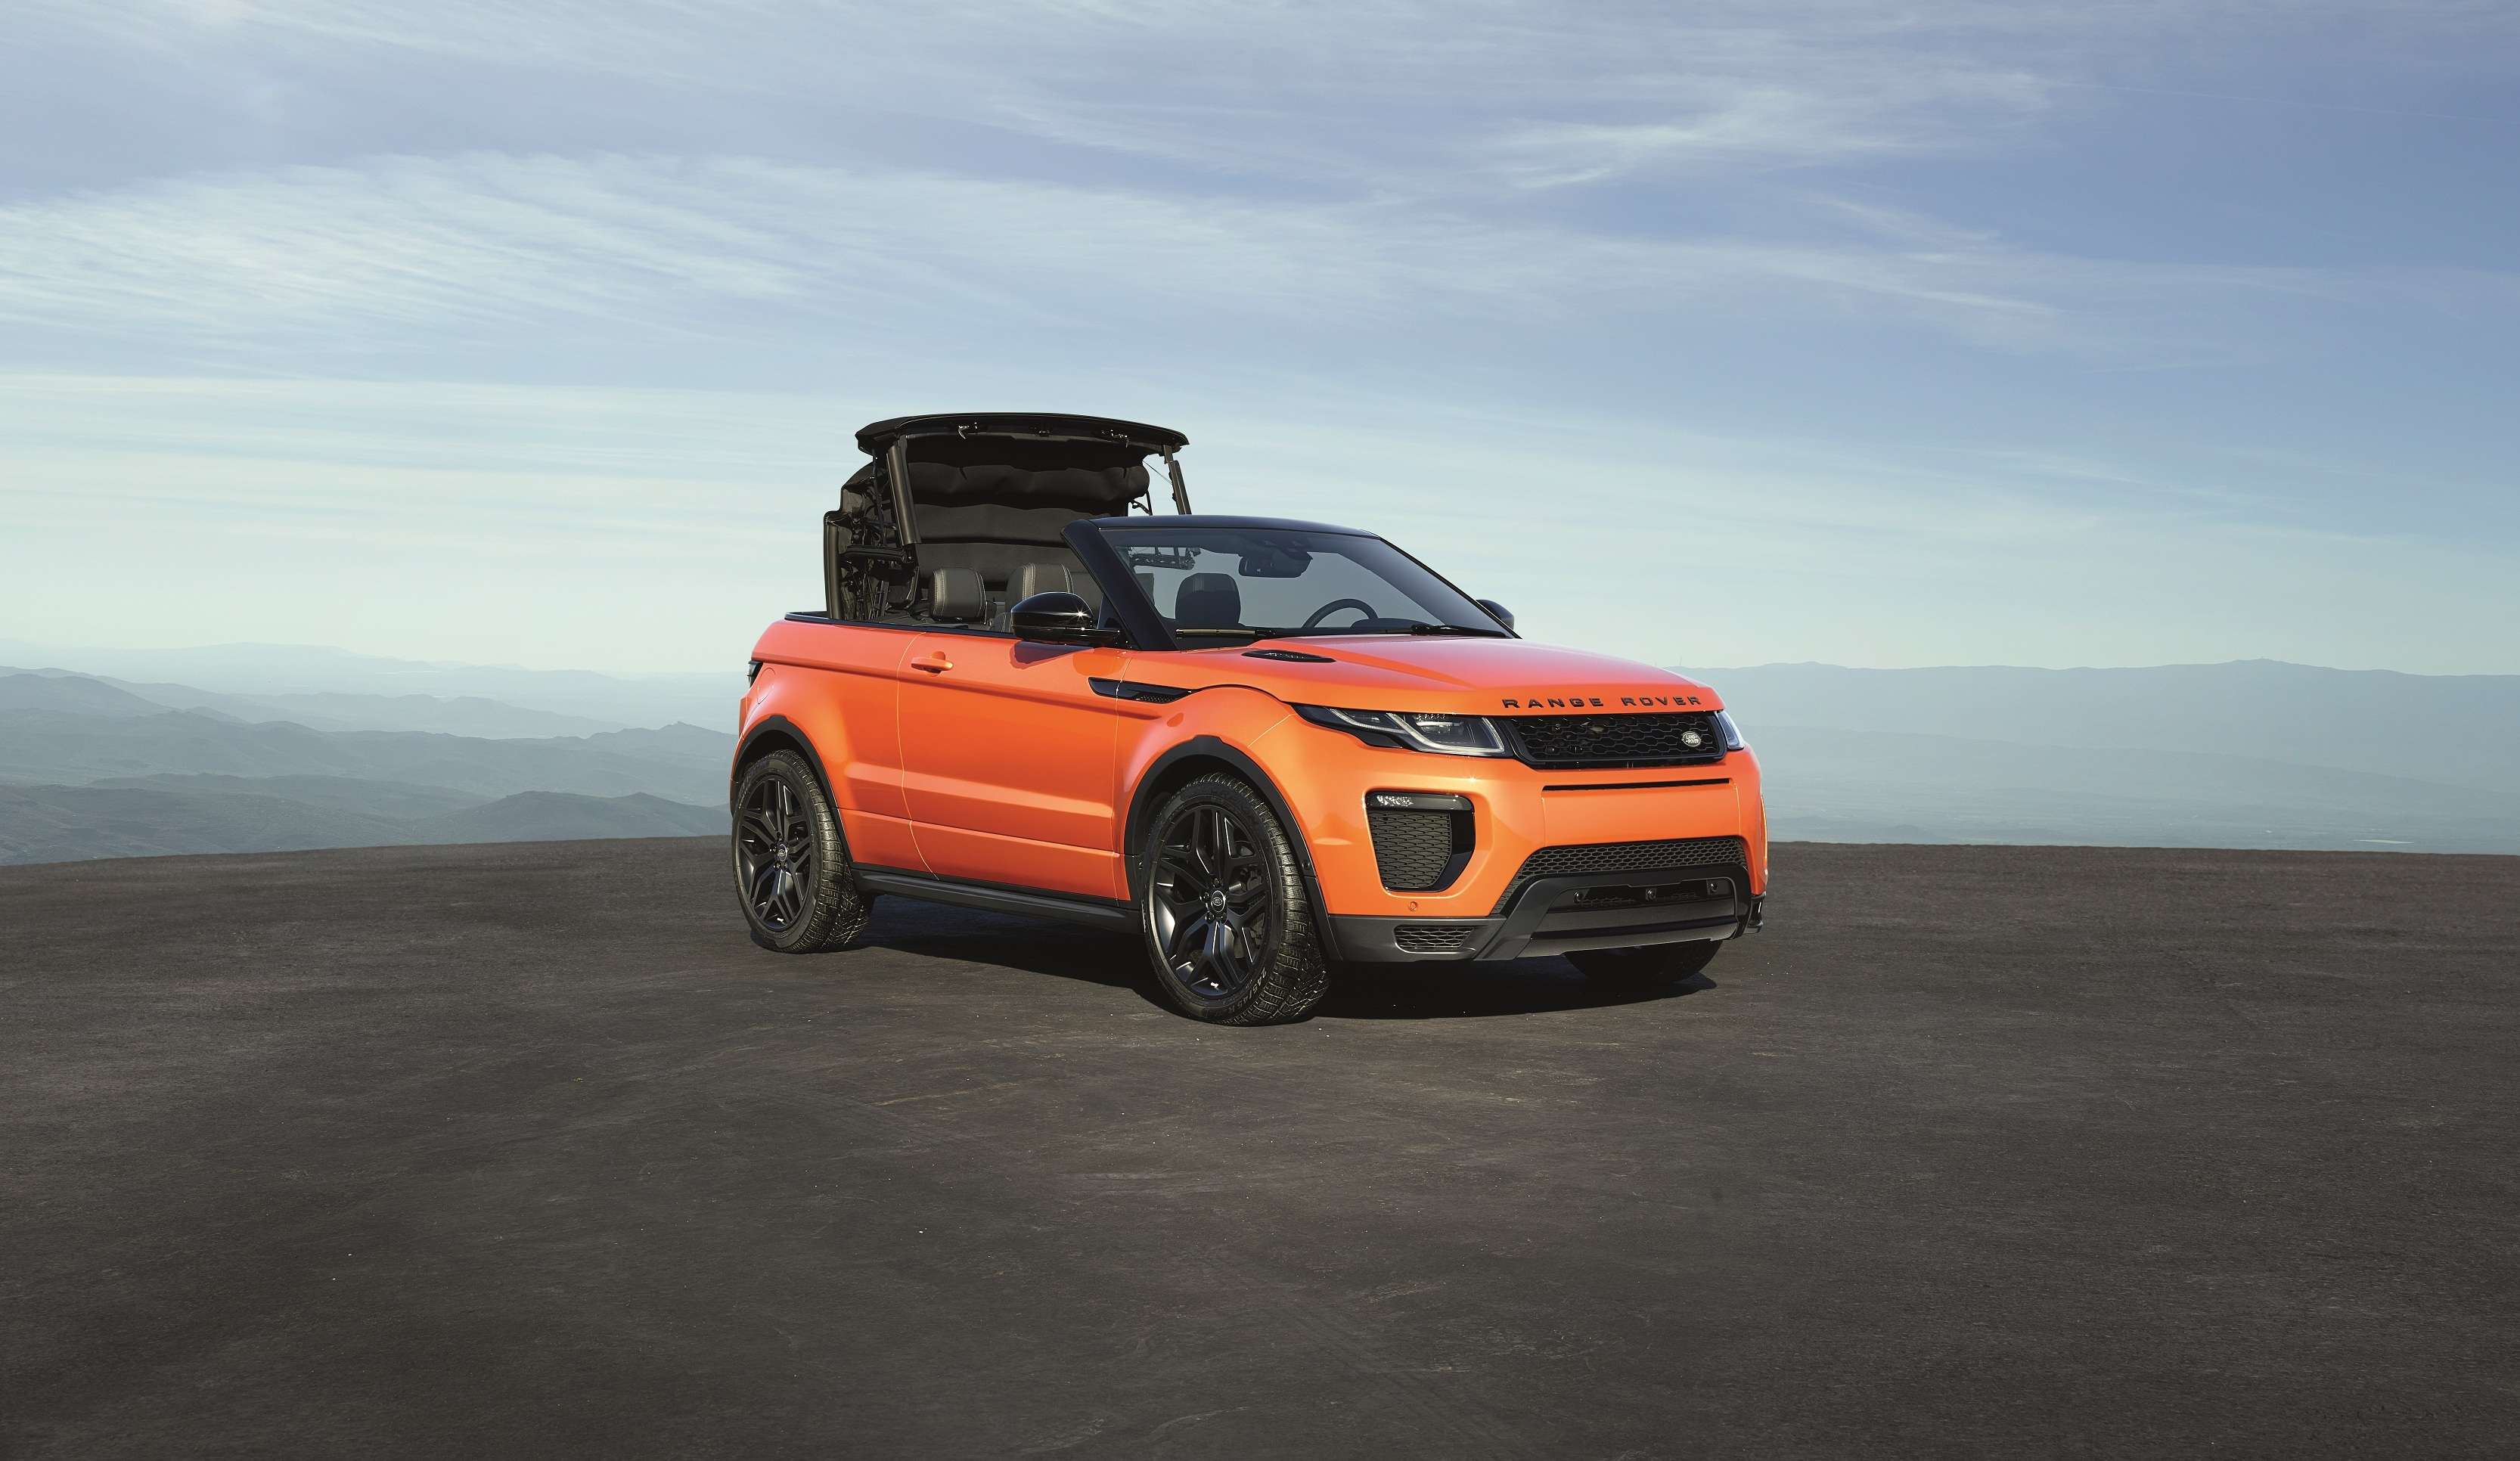 Land Rover strikes a pose with convertible four-wheel drive Range Rover  Evoque | South China Morning Post